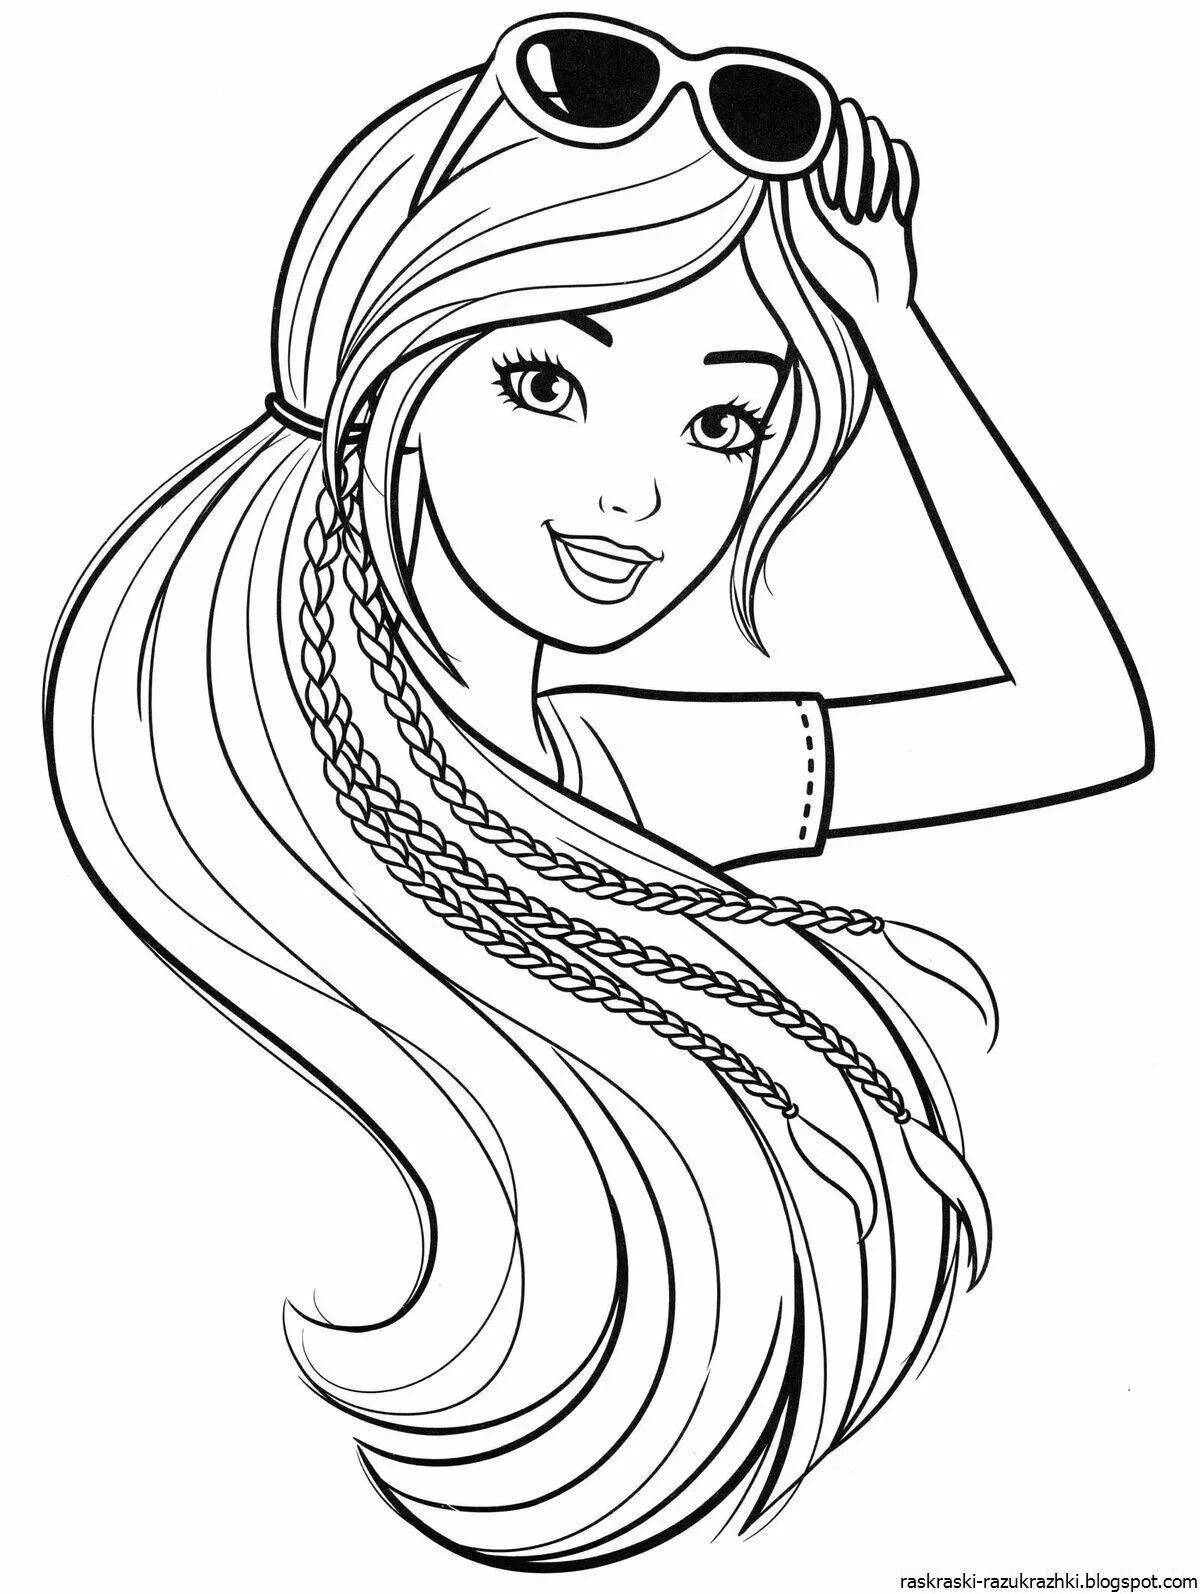 Barbie fairytale coloring page